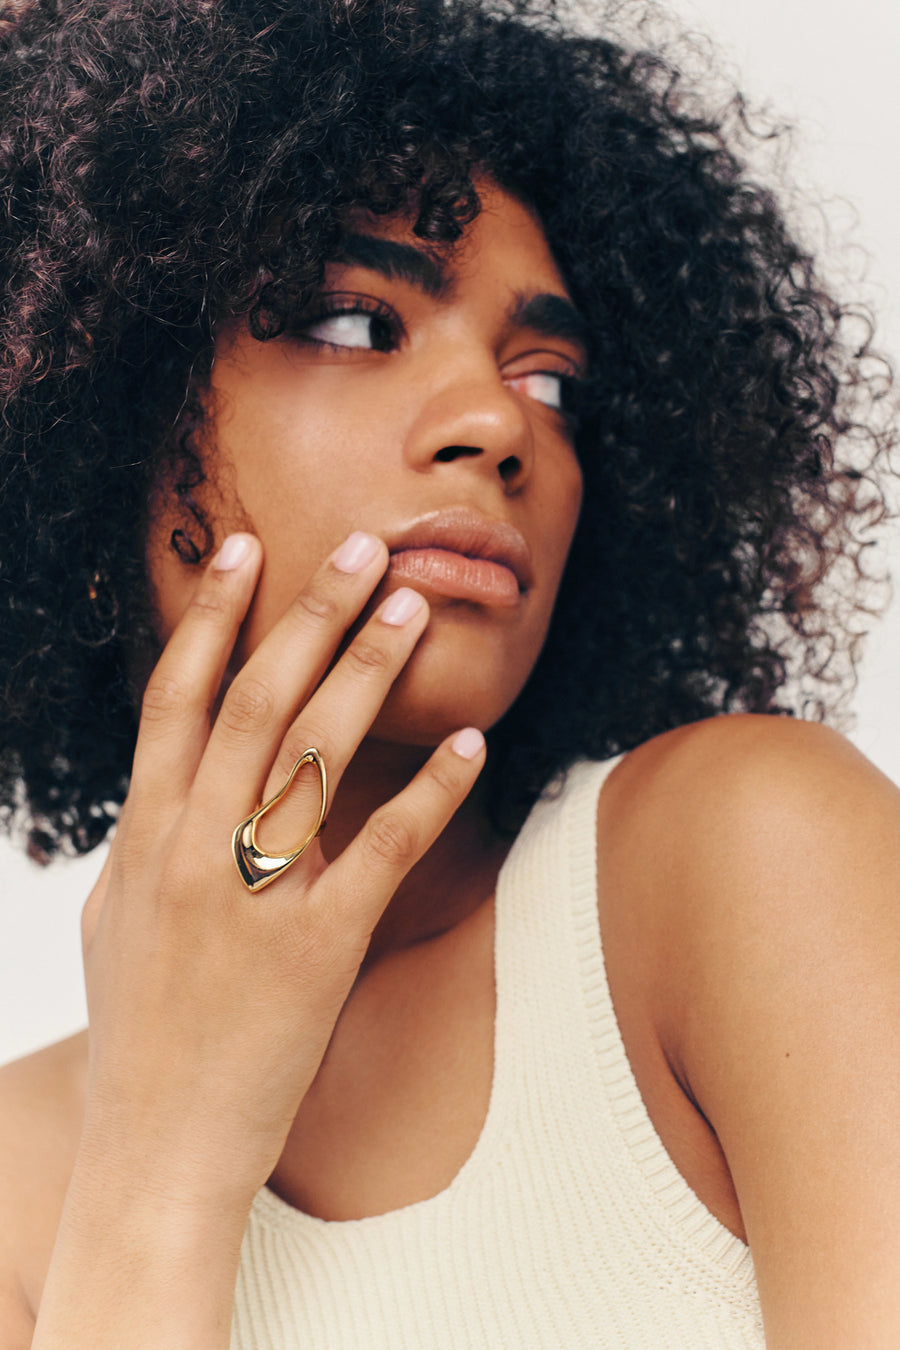 PARIS Ring. Ring topped with abstract wavy form, open-ended, can fit with US sizes 5-7, 18K gold vermeil, handmade, hypoallergenic, water-resistant